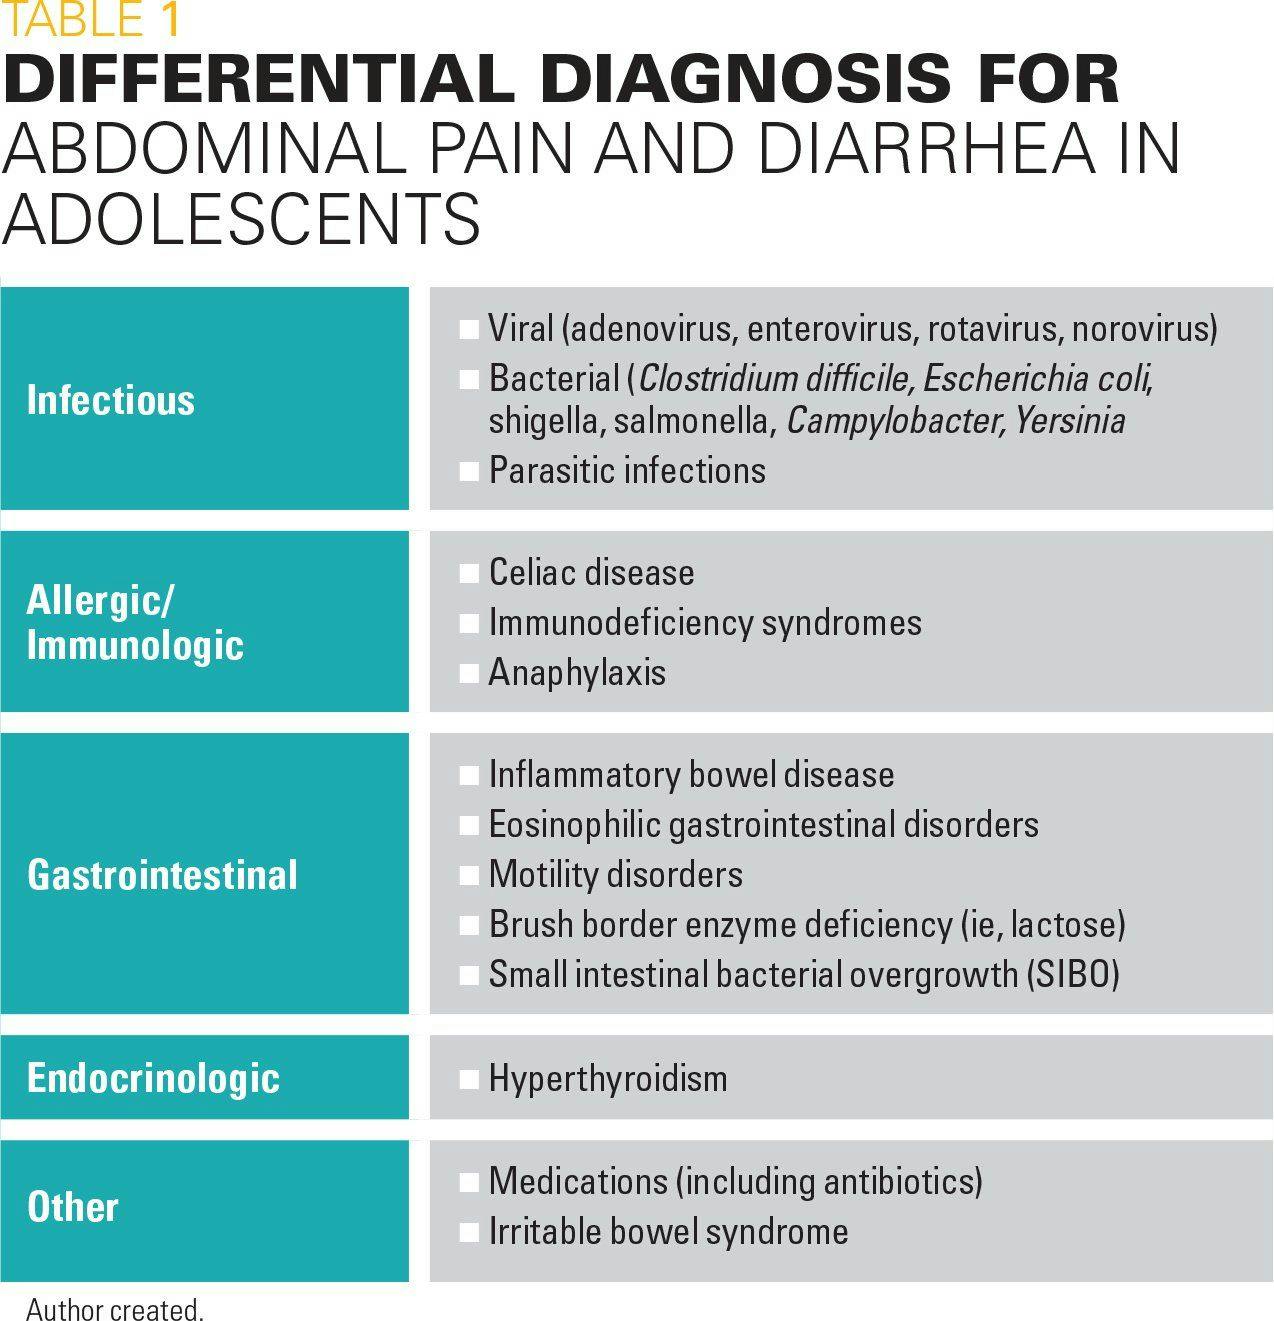 Differential diagnosis for abdominal pain and diarrhea in adolescents